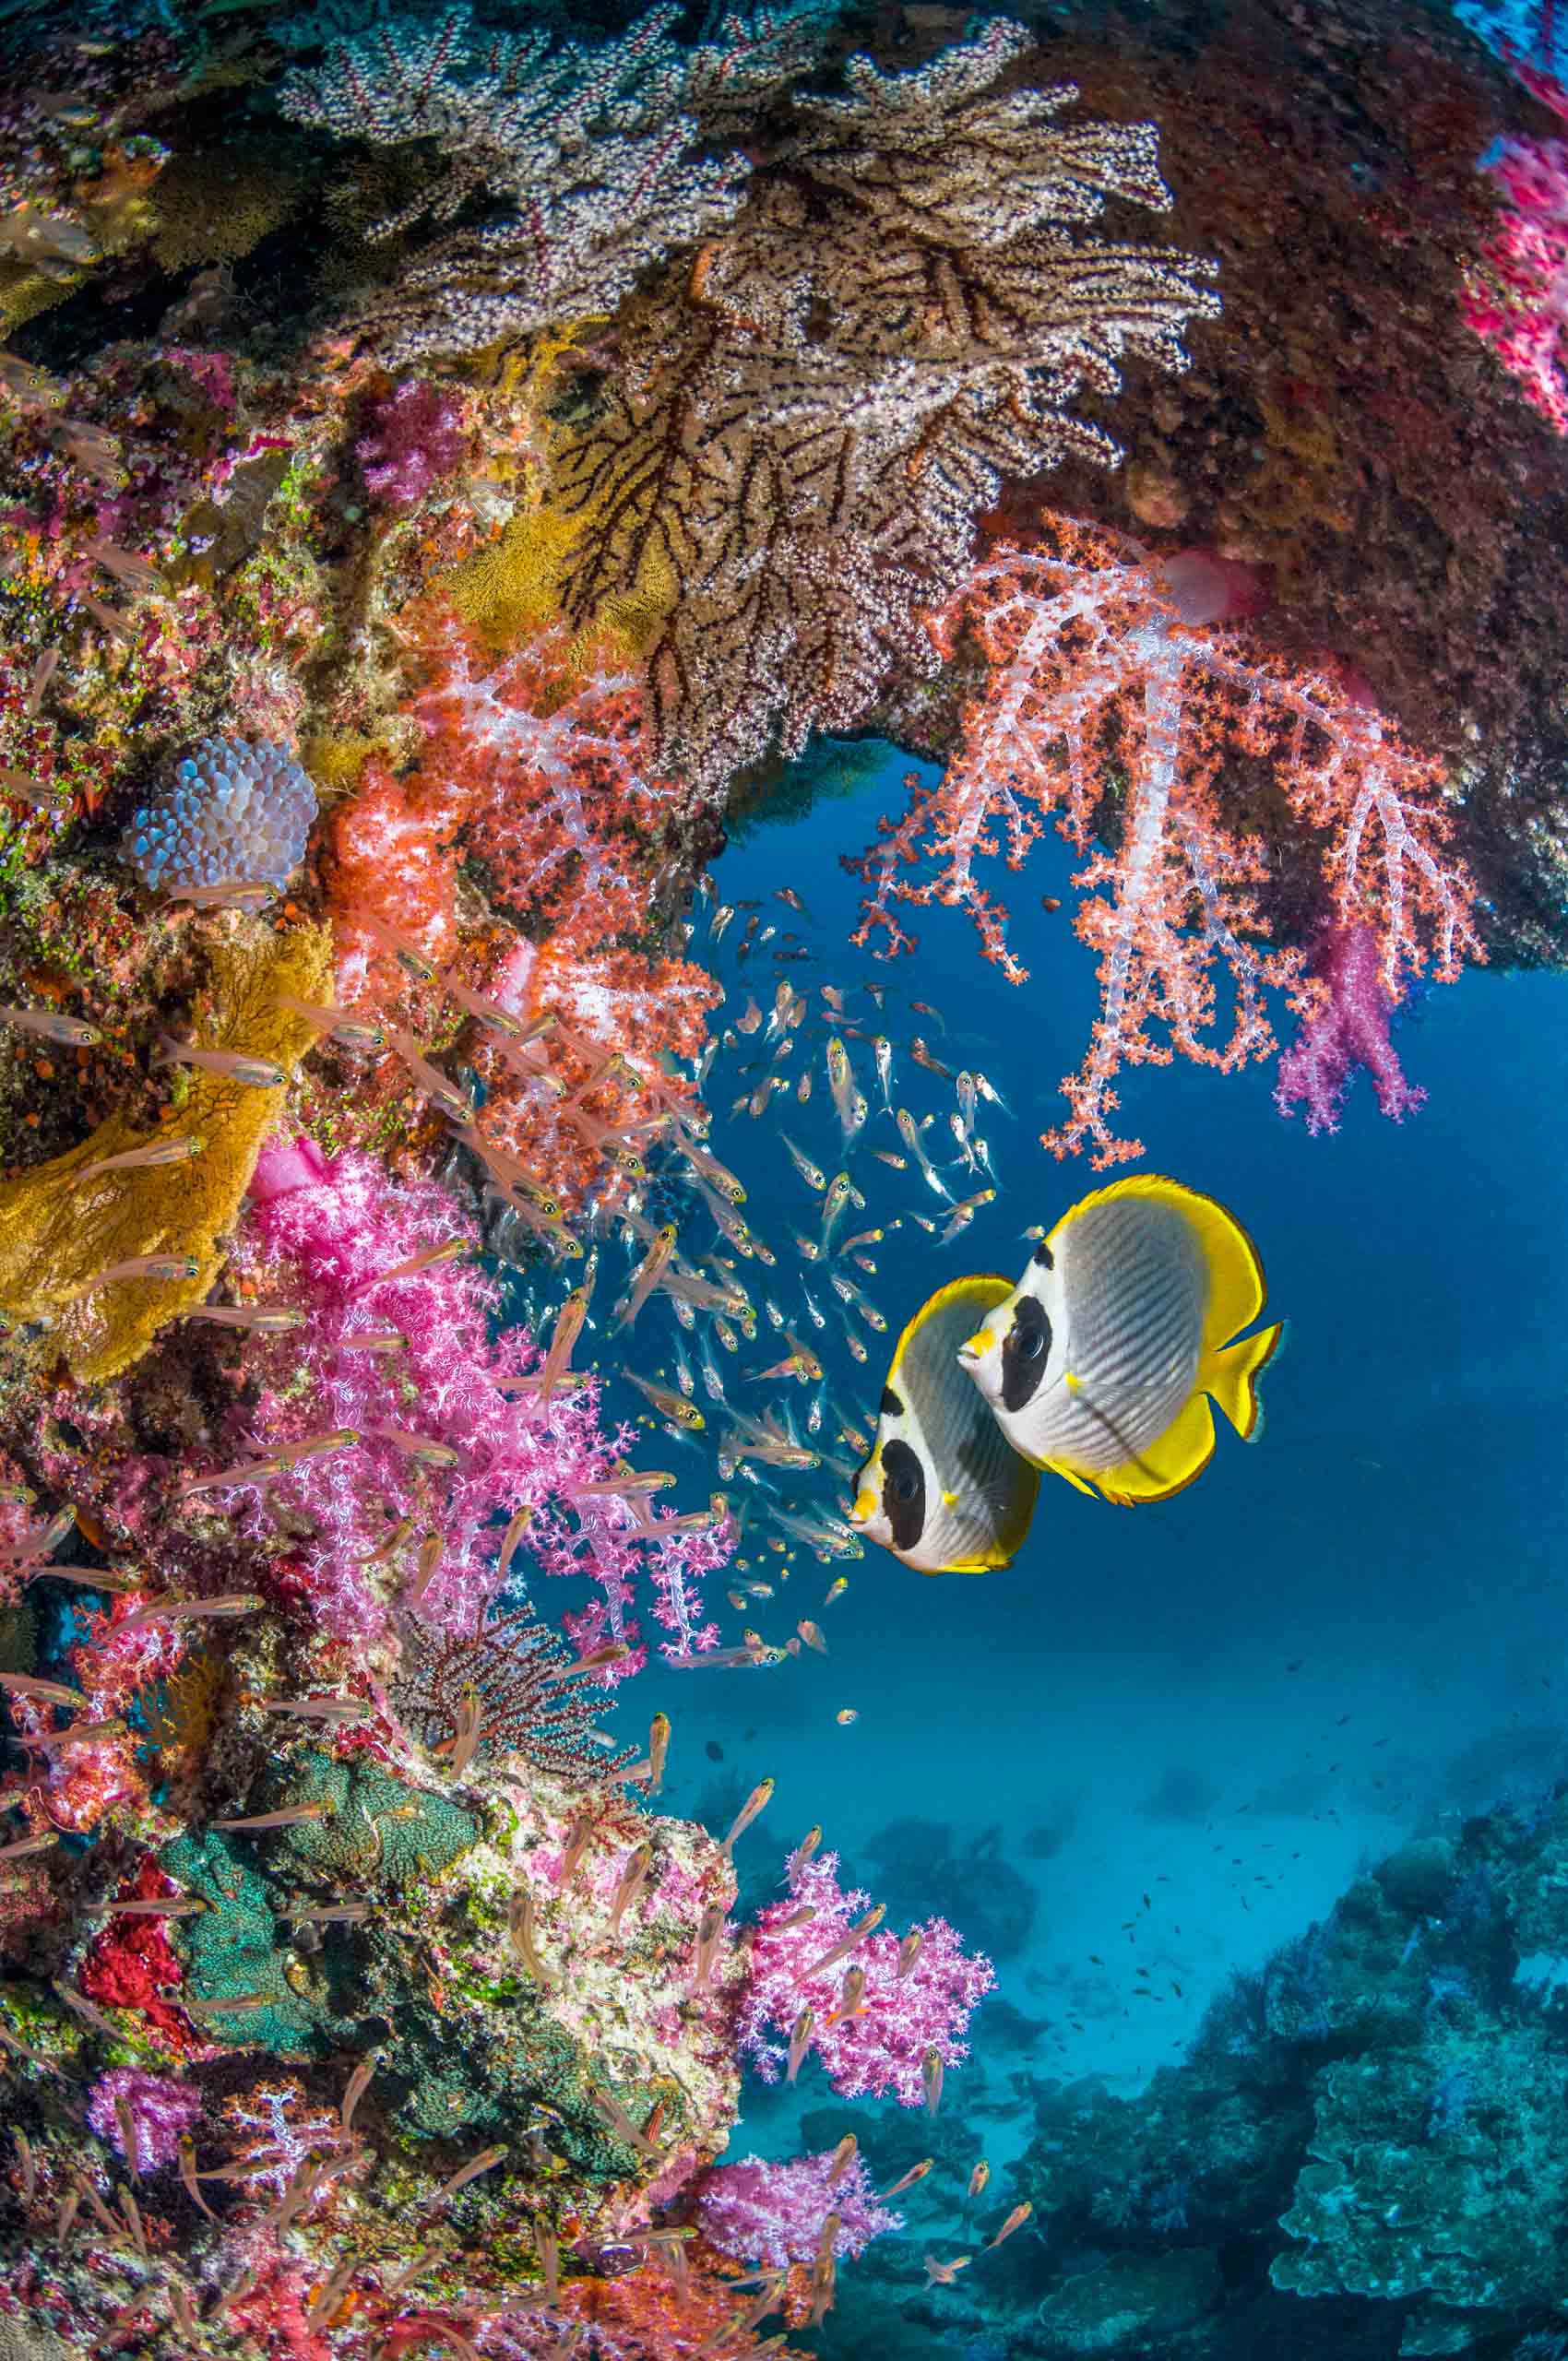 Coral reef scenery with a pair of Panda butterflyfish.